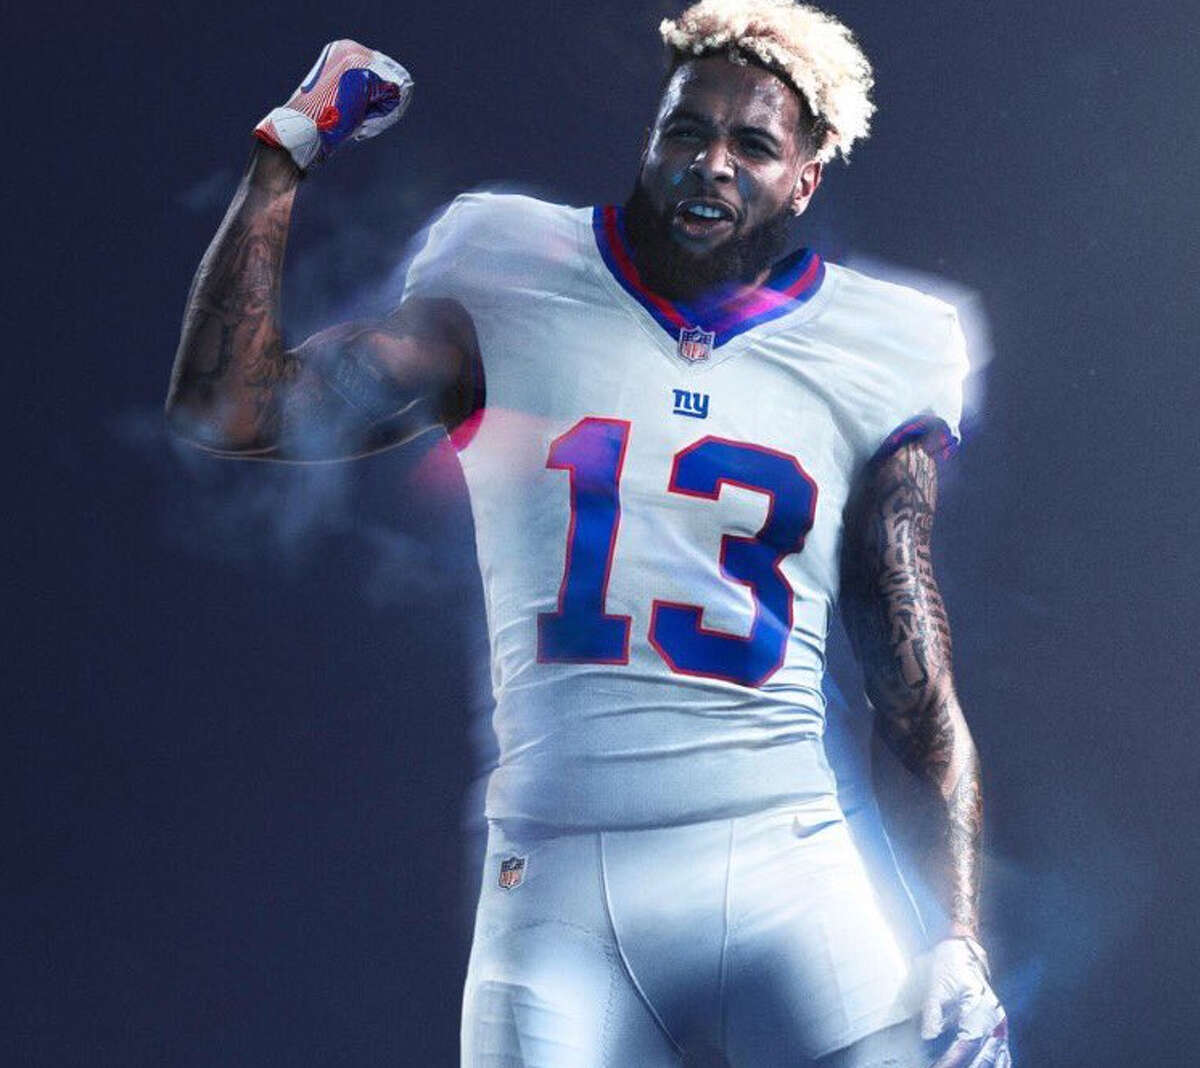 New York Giants When they'll wear them: Oct. 11 vs. Eagles